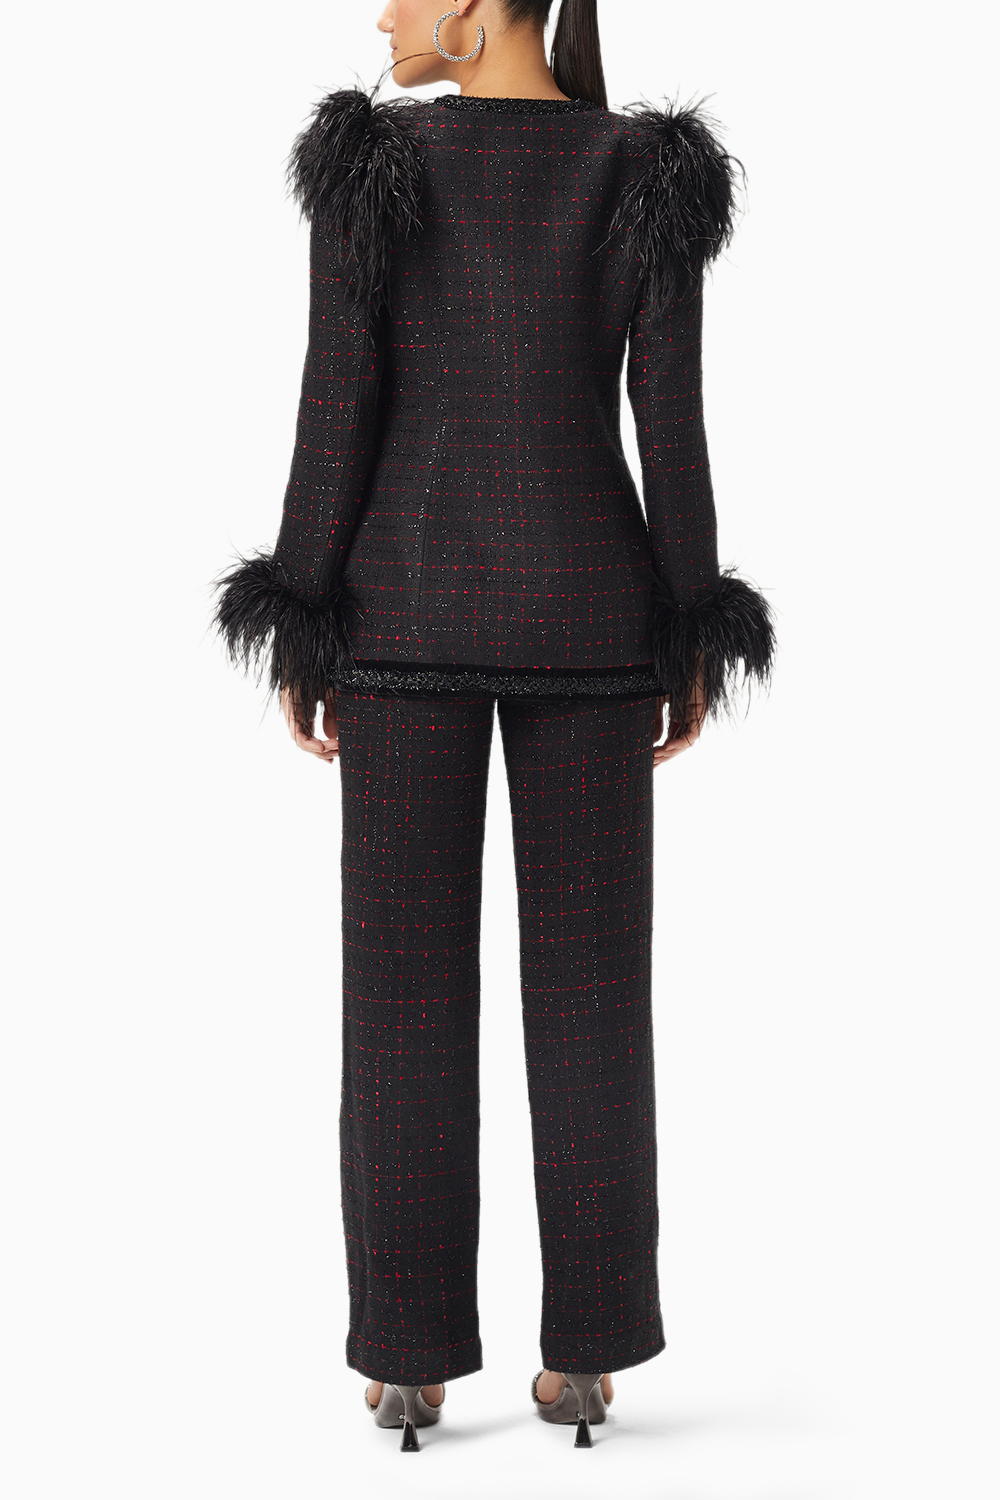 Red And Black Check Tweed Jacket And Pants